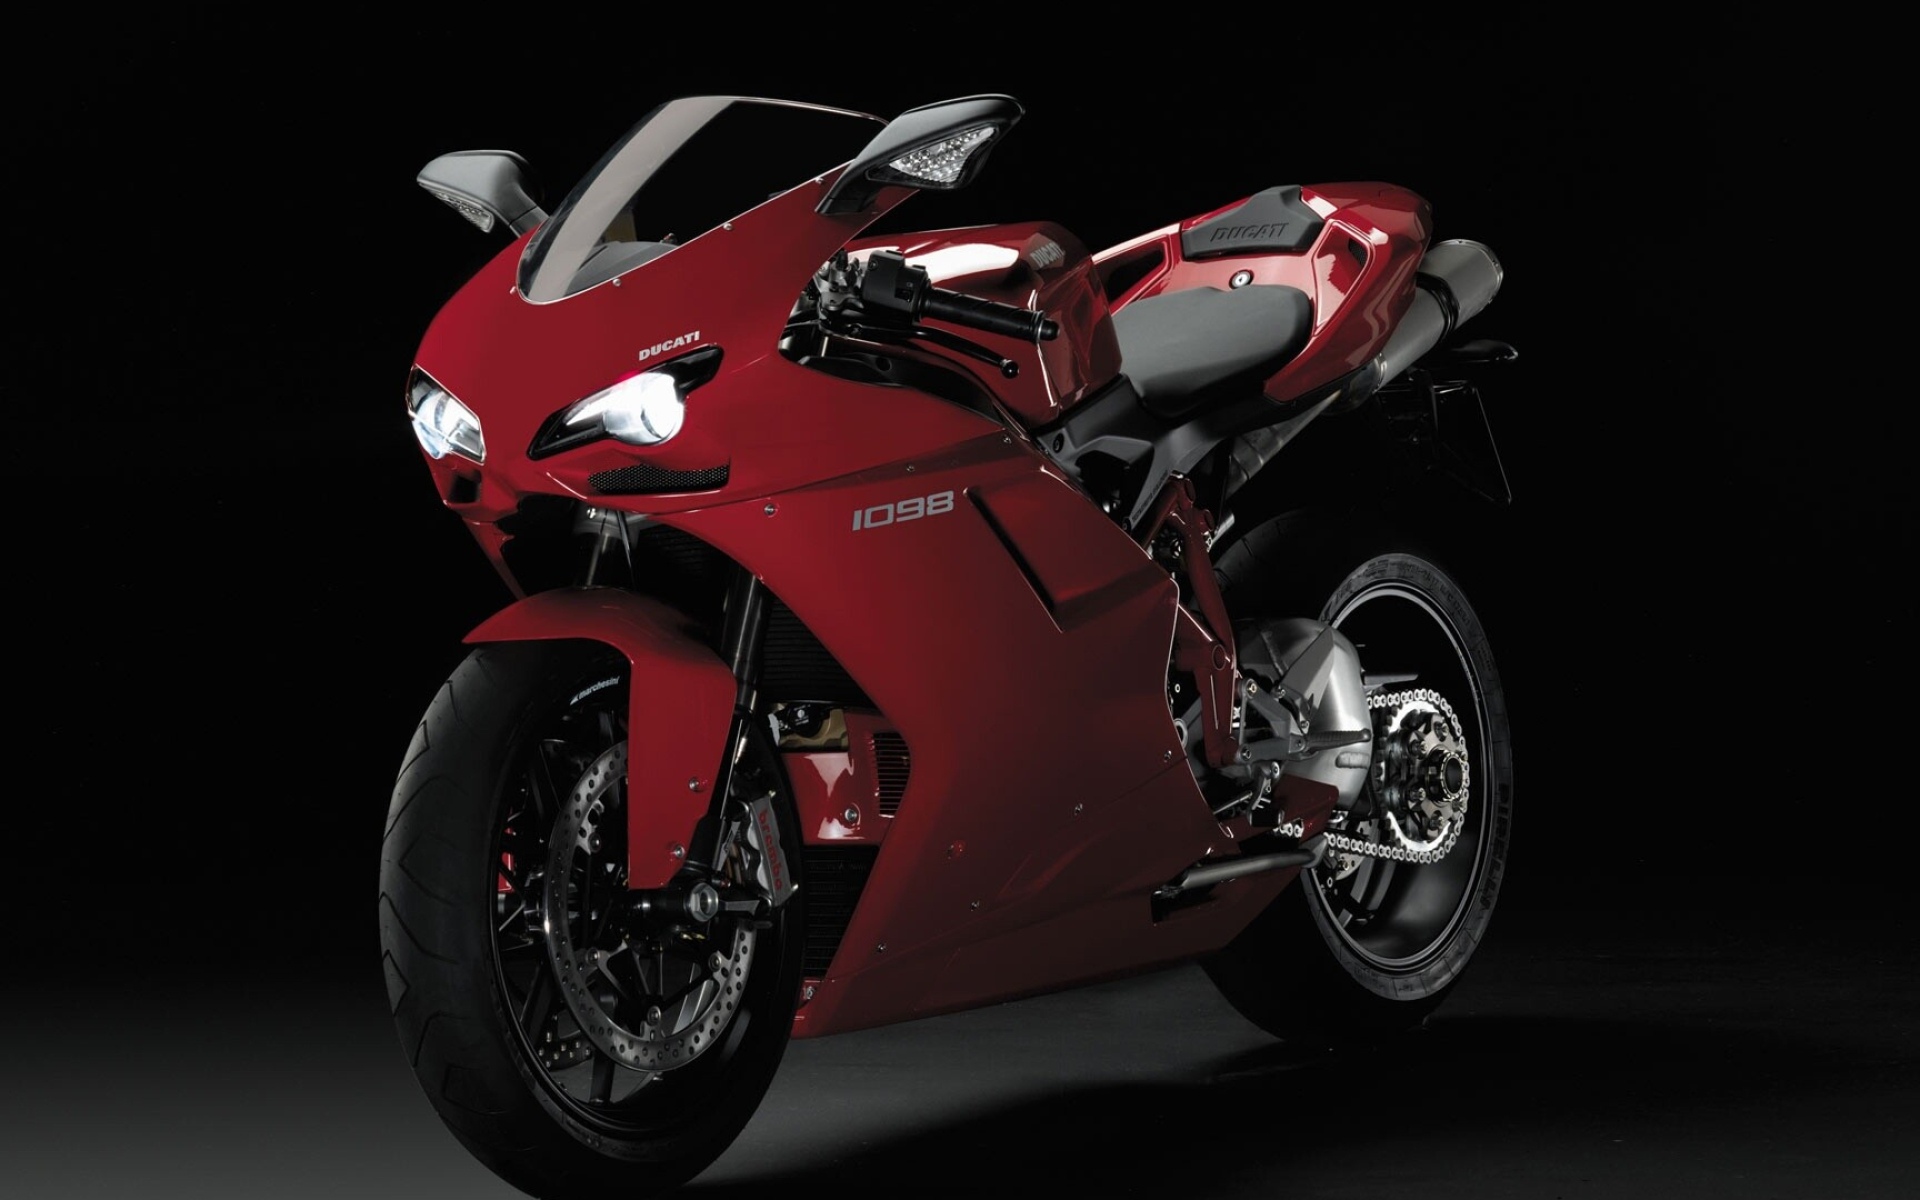 Ducati: A sport bike made from 2007 to 2009, in three versions, the 1098, 1098S, and 1098R. 1920x1200 HD Wallpaper.